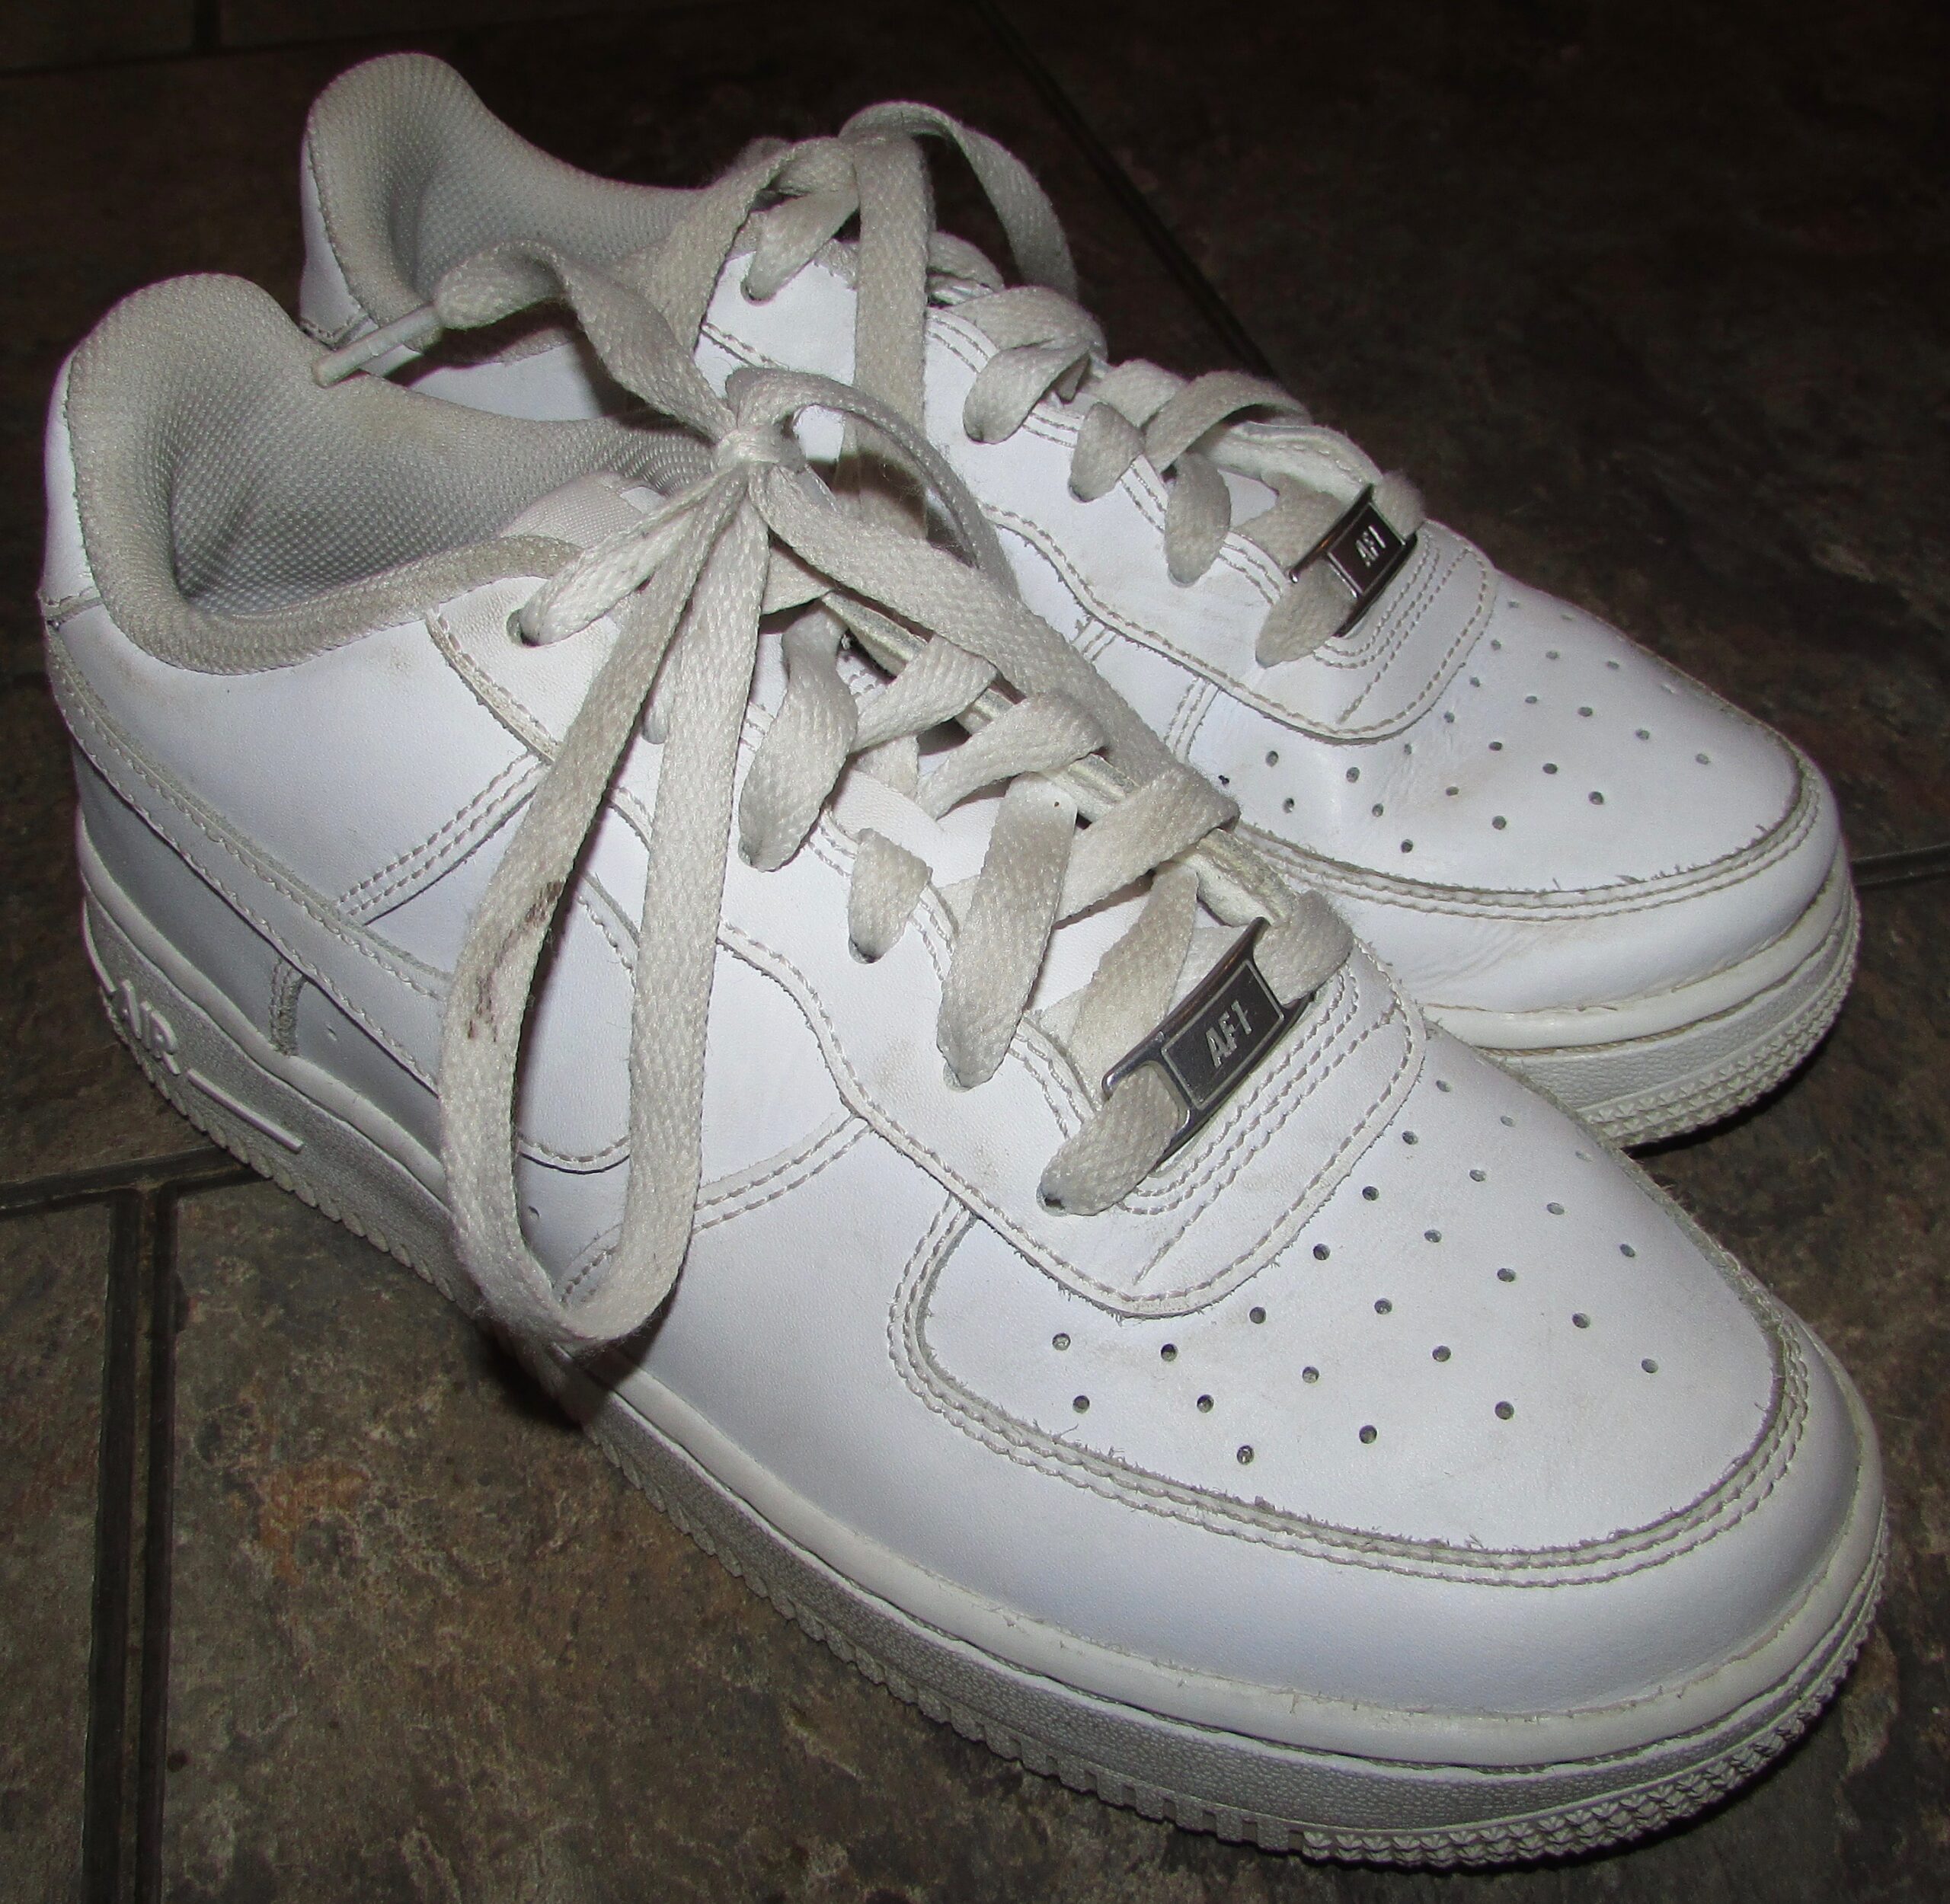 Nike AF1 Air Force 1 Triple White Sneakers Size 5Y - Heet On Your Feet